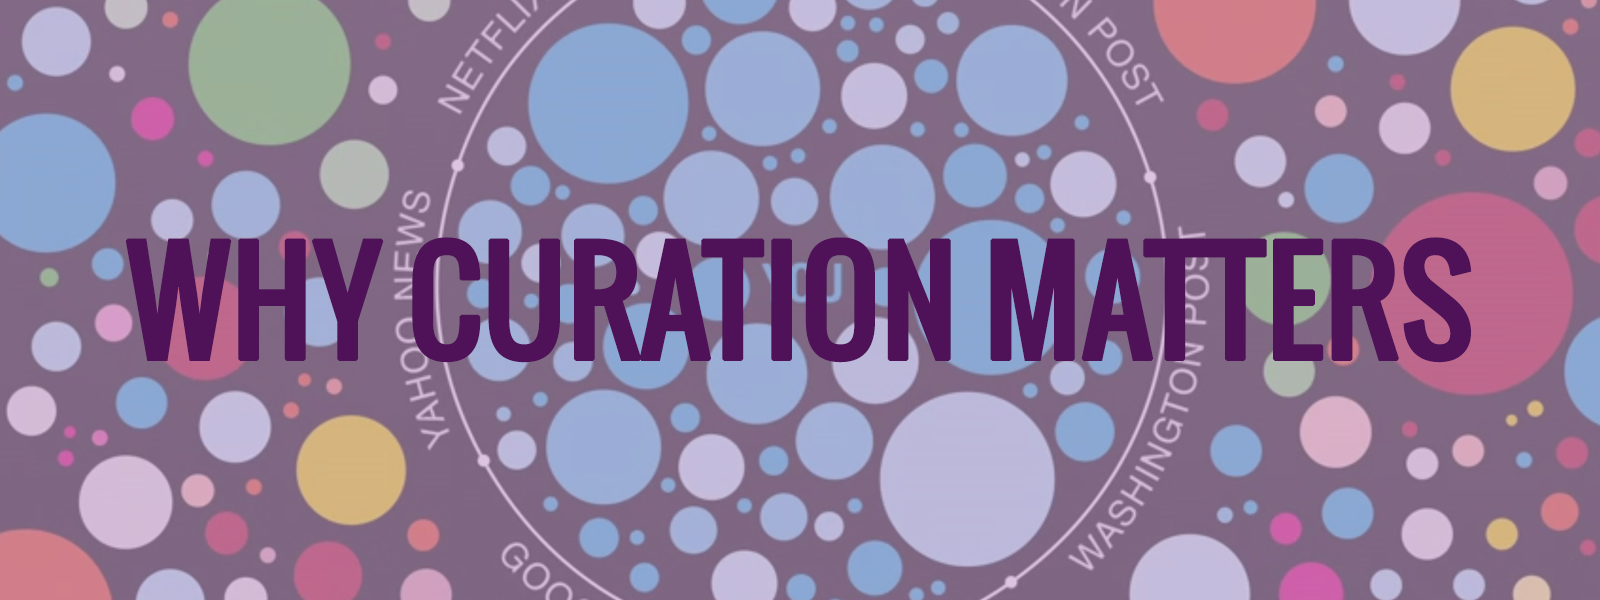 Why Curation Matters